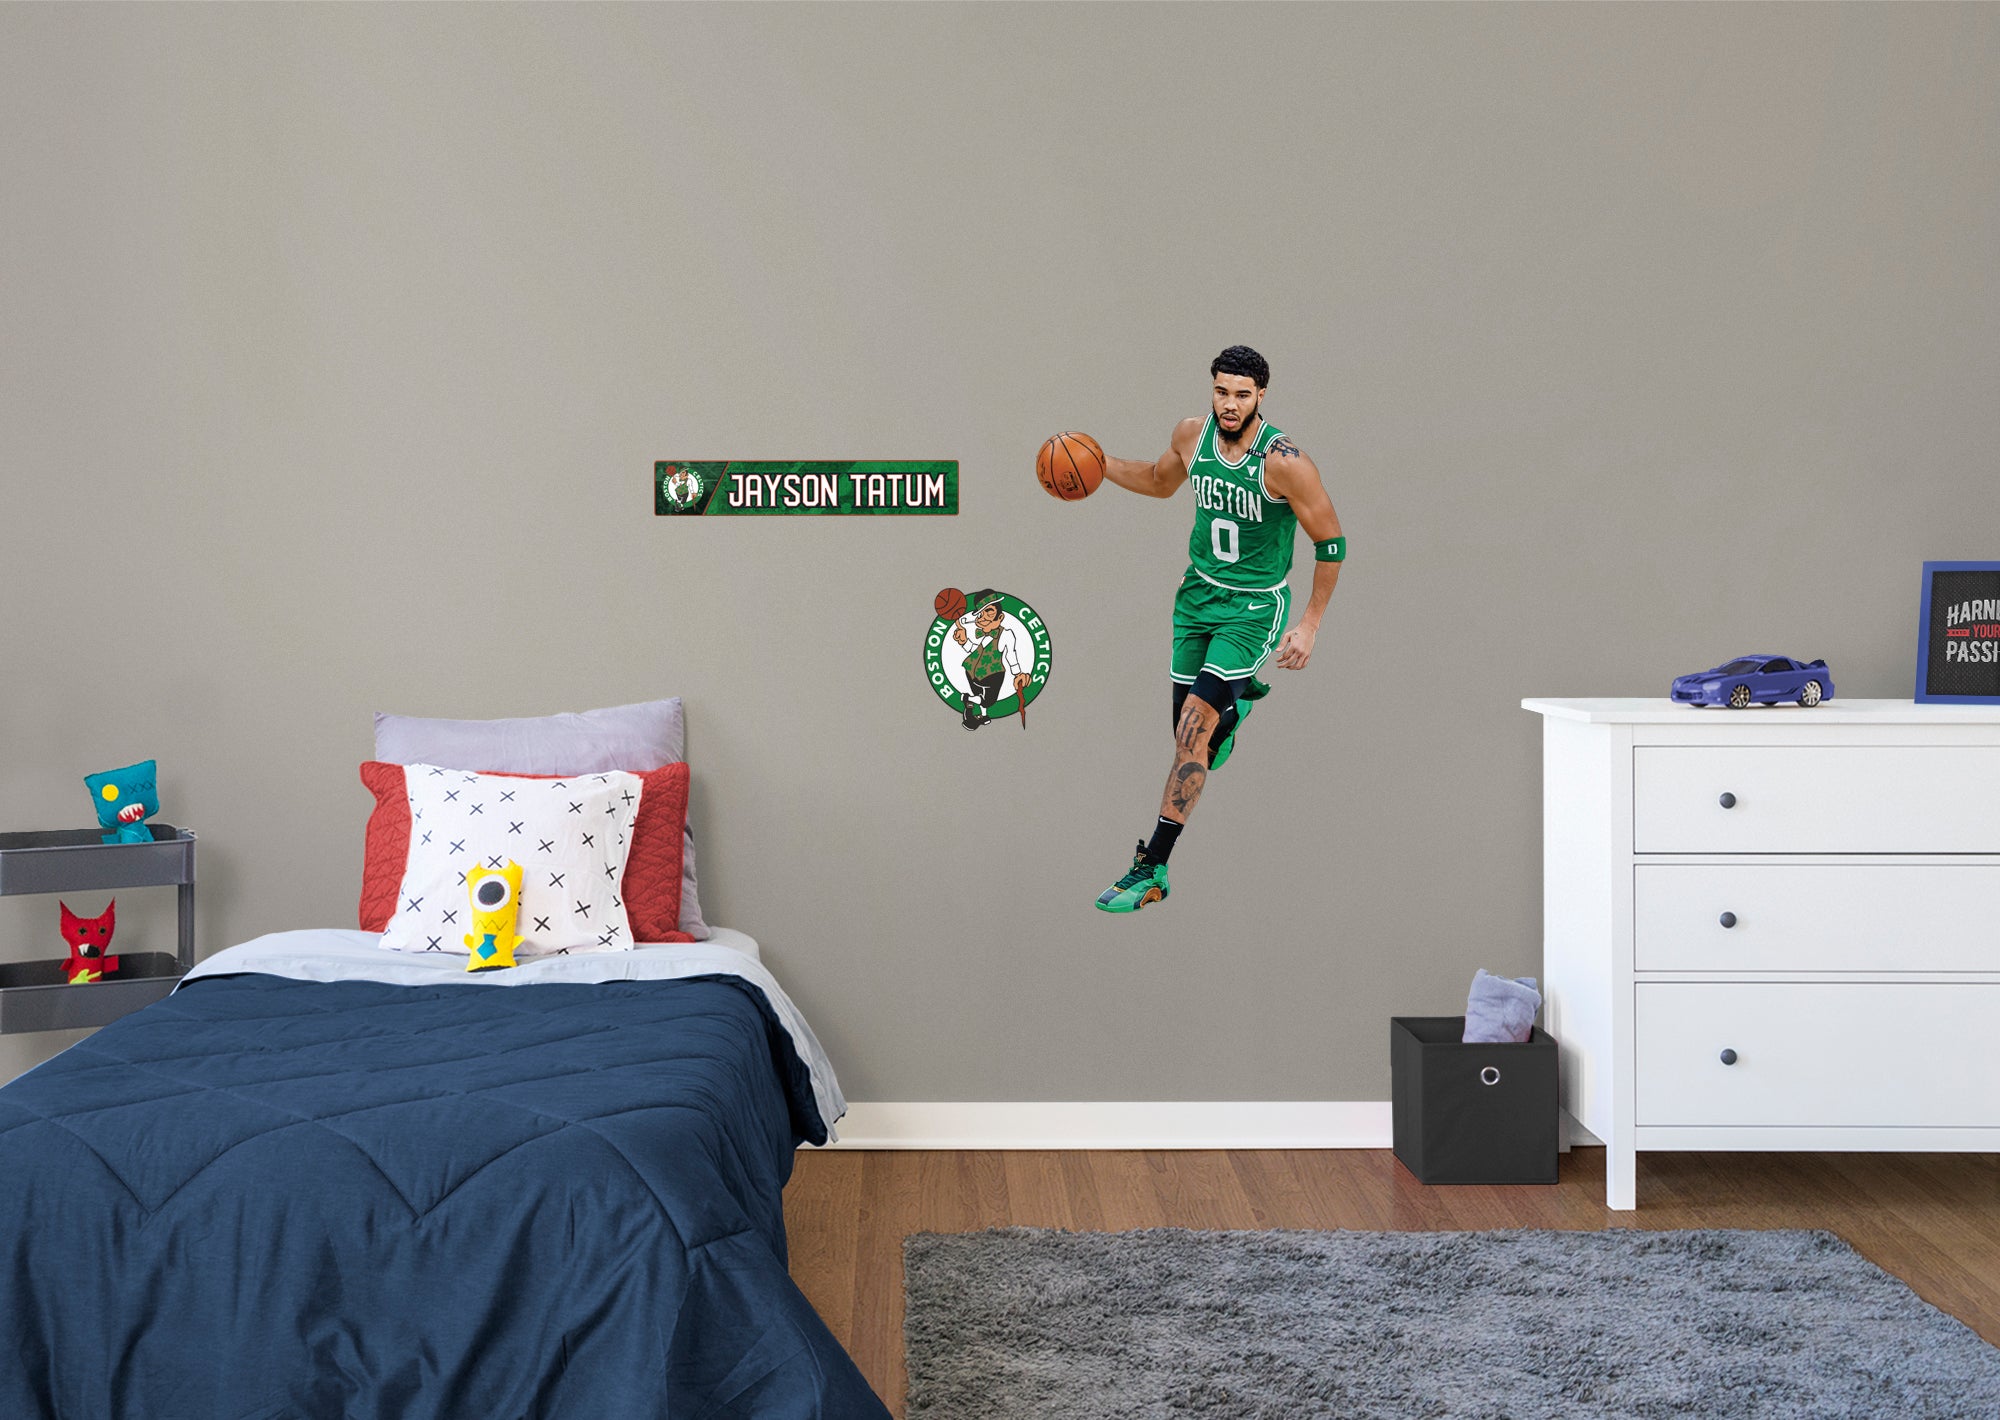 Jayson Tatum 2021 for Boston Celtics - Officially Licensed NBA Removable Wall Decal Giant Athlete + 2 Decals (27.5"W x 50"H) by